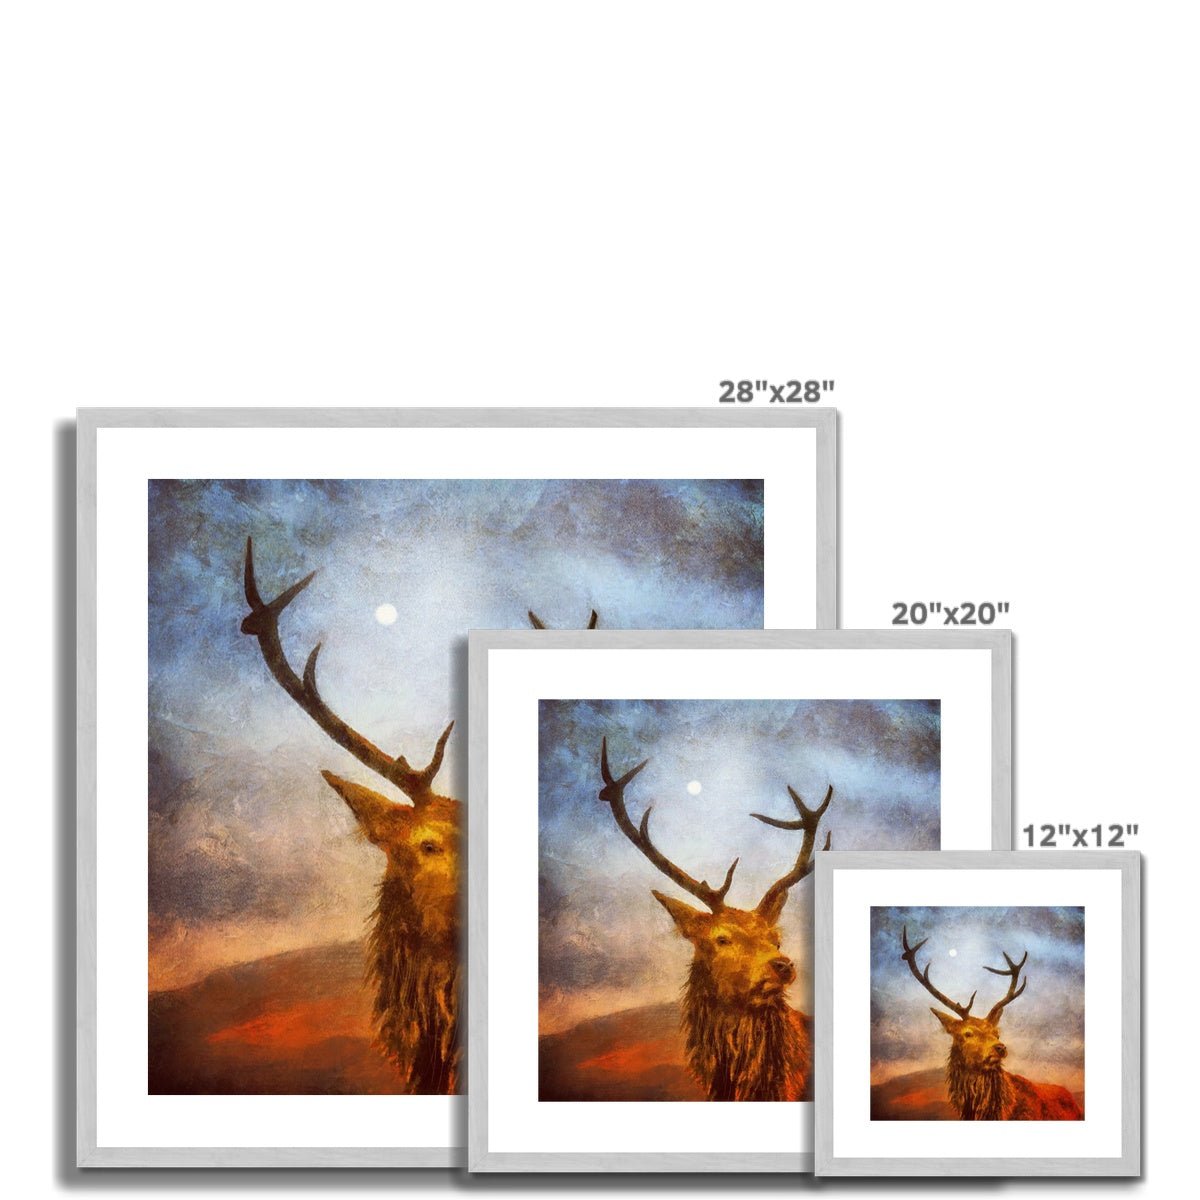 A Moonlit Highland Stag Painting | Antique Framed & Mounted Prints From Scotland-Antique Framed & Mounted Prints-Scottish Highlands & Lowlands Art Gallery-Paintings, Prints, Homeware, Art Gifts From Scotland By Scottish Artist Kevin Hunter